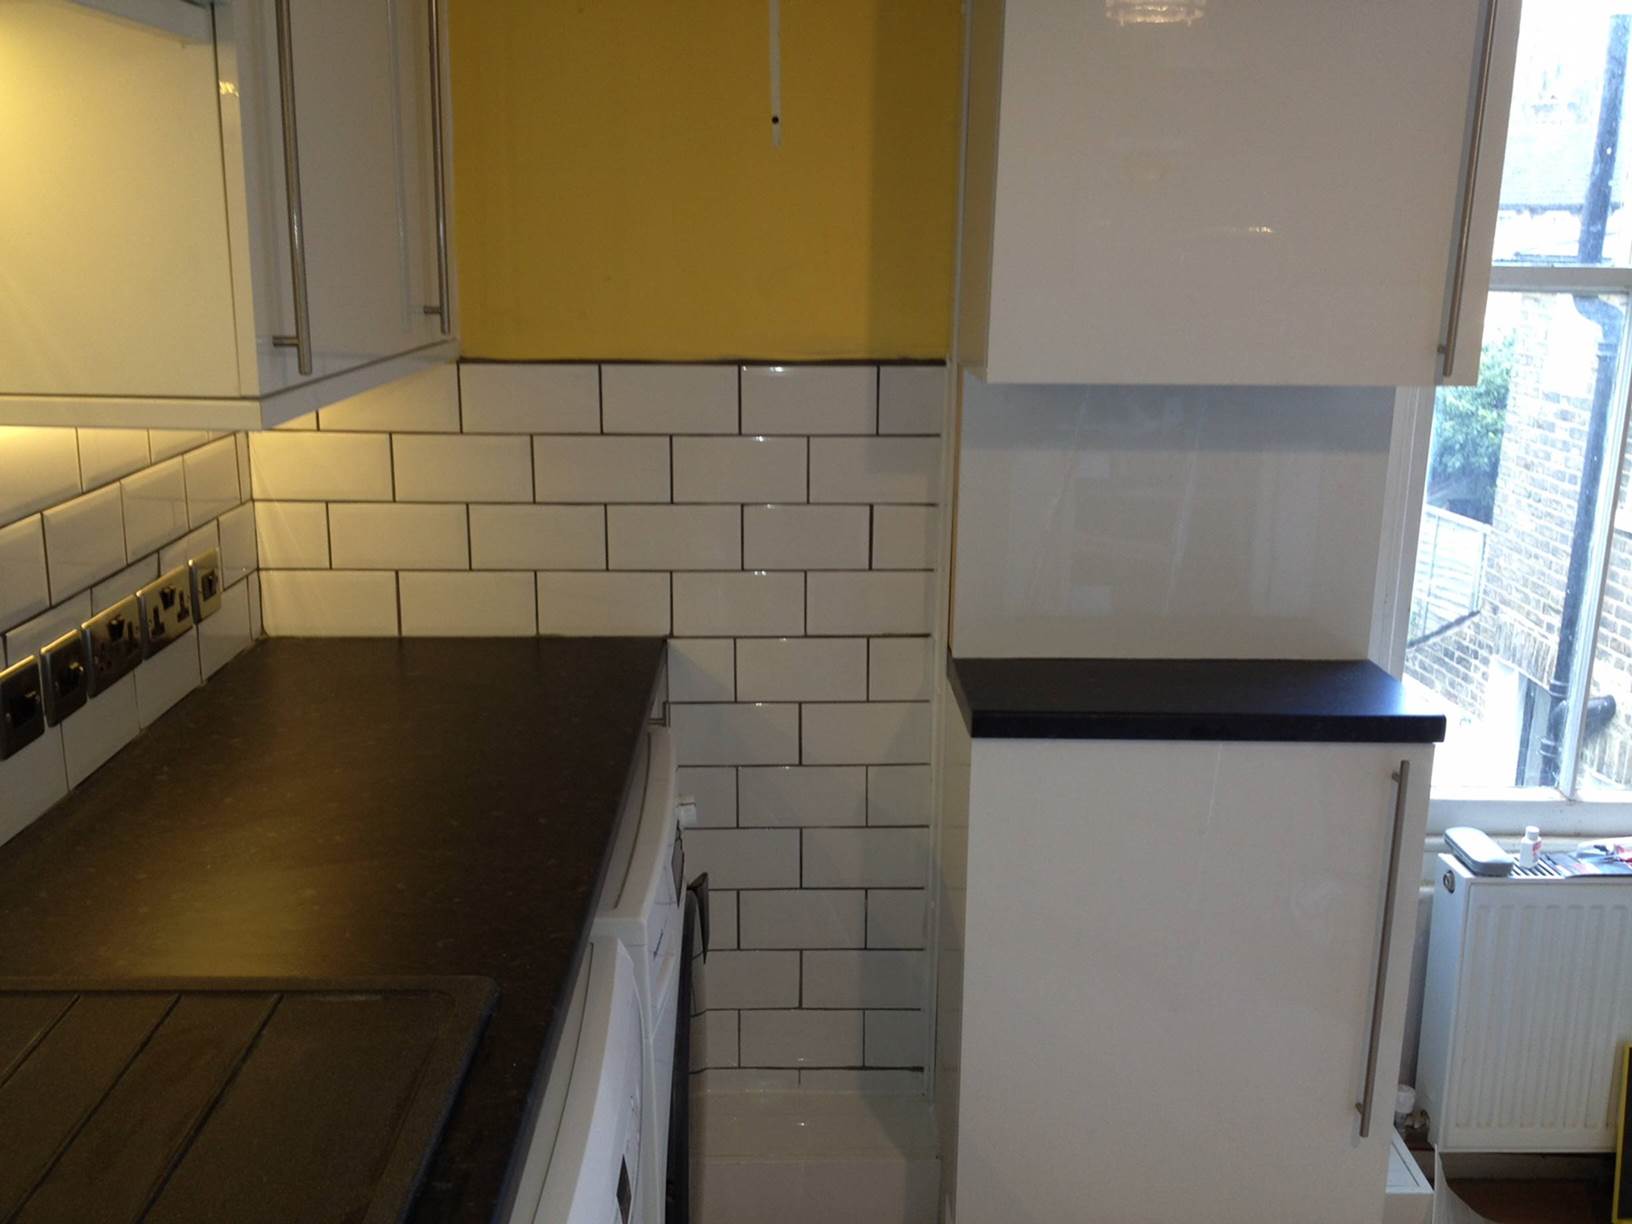 Kitchen wall tiling